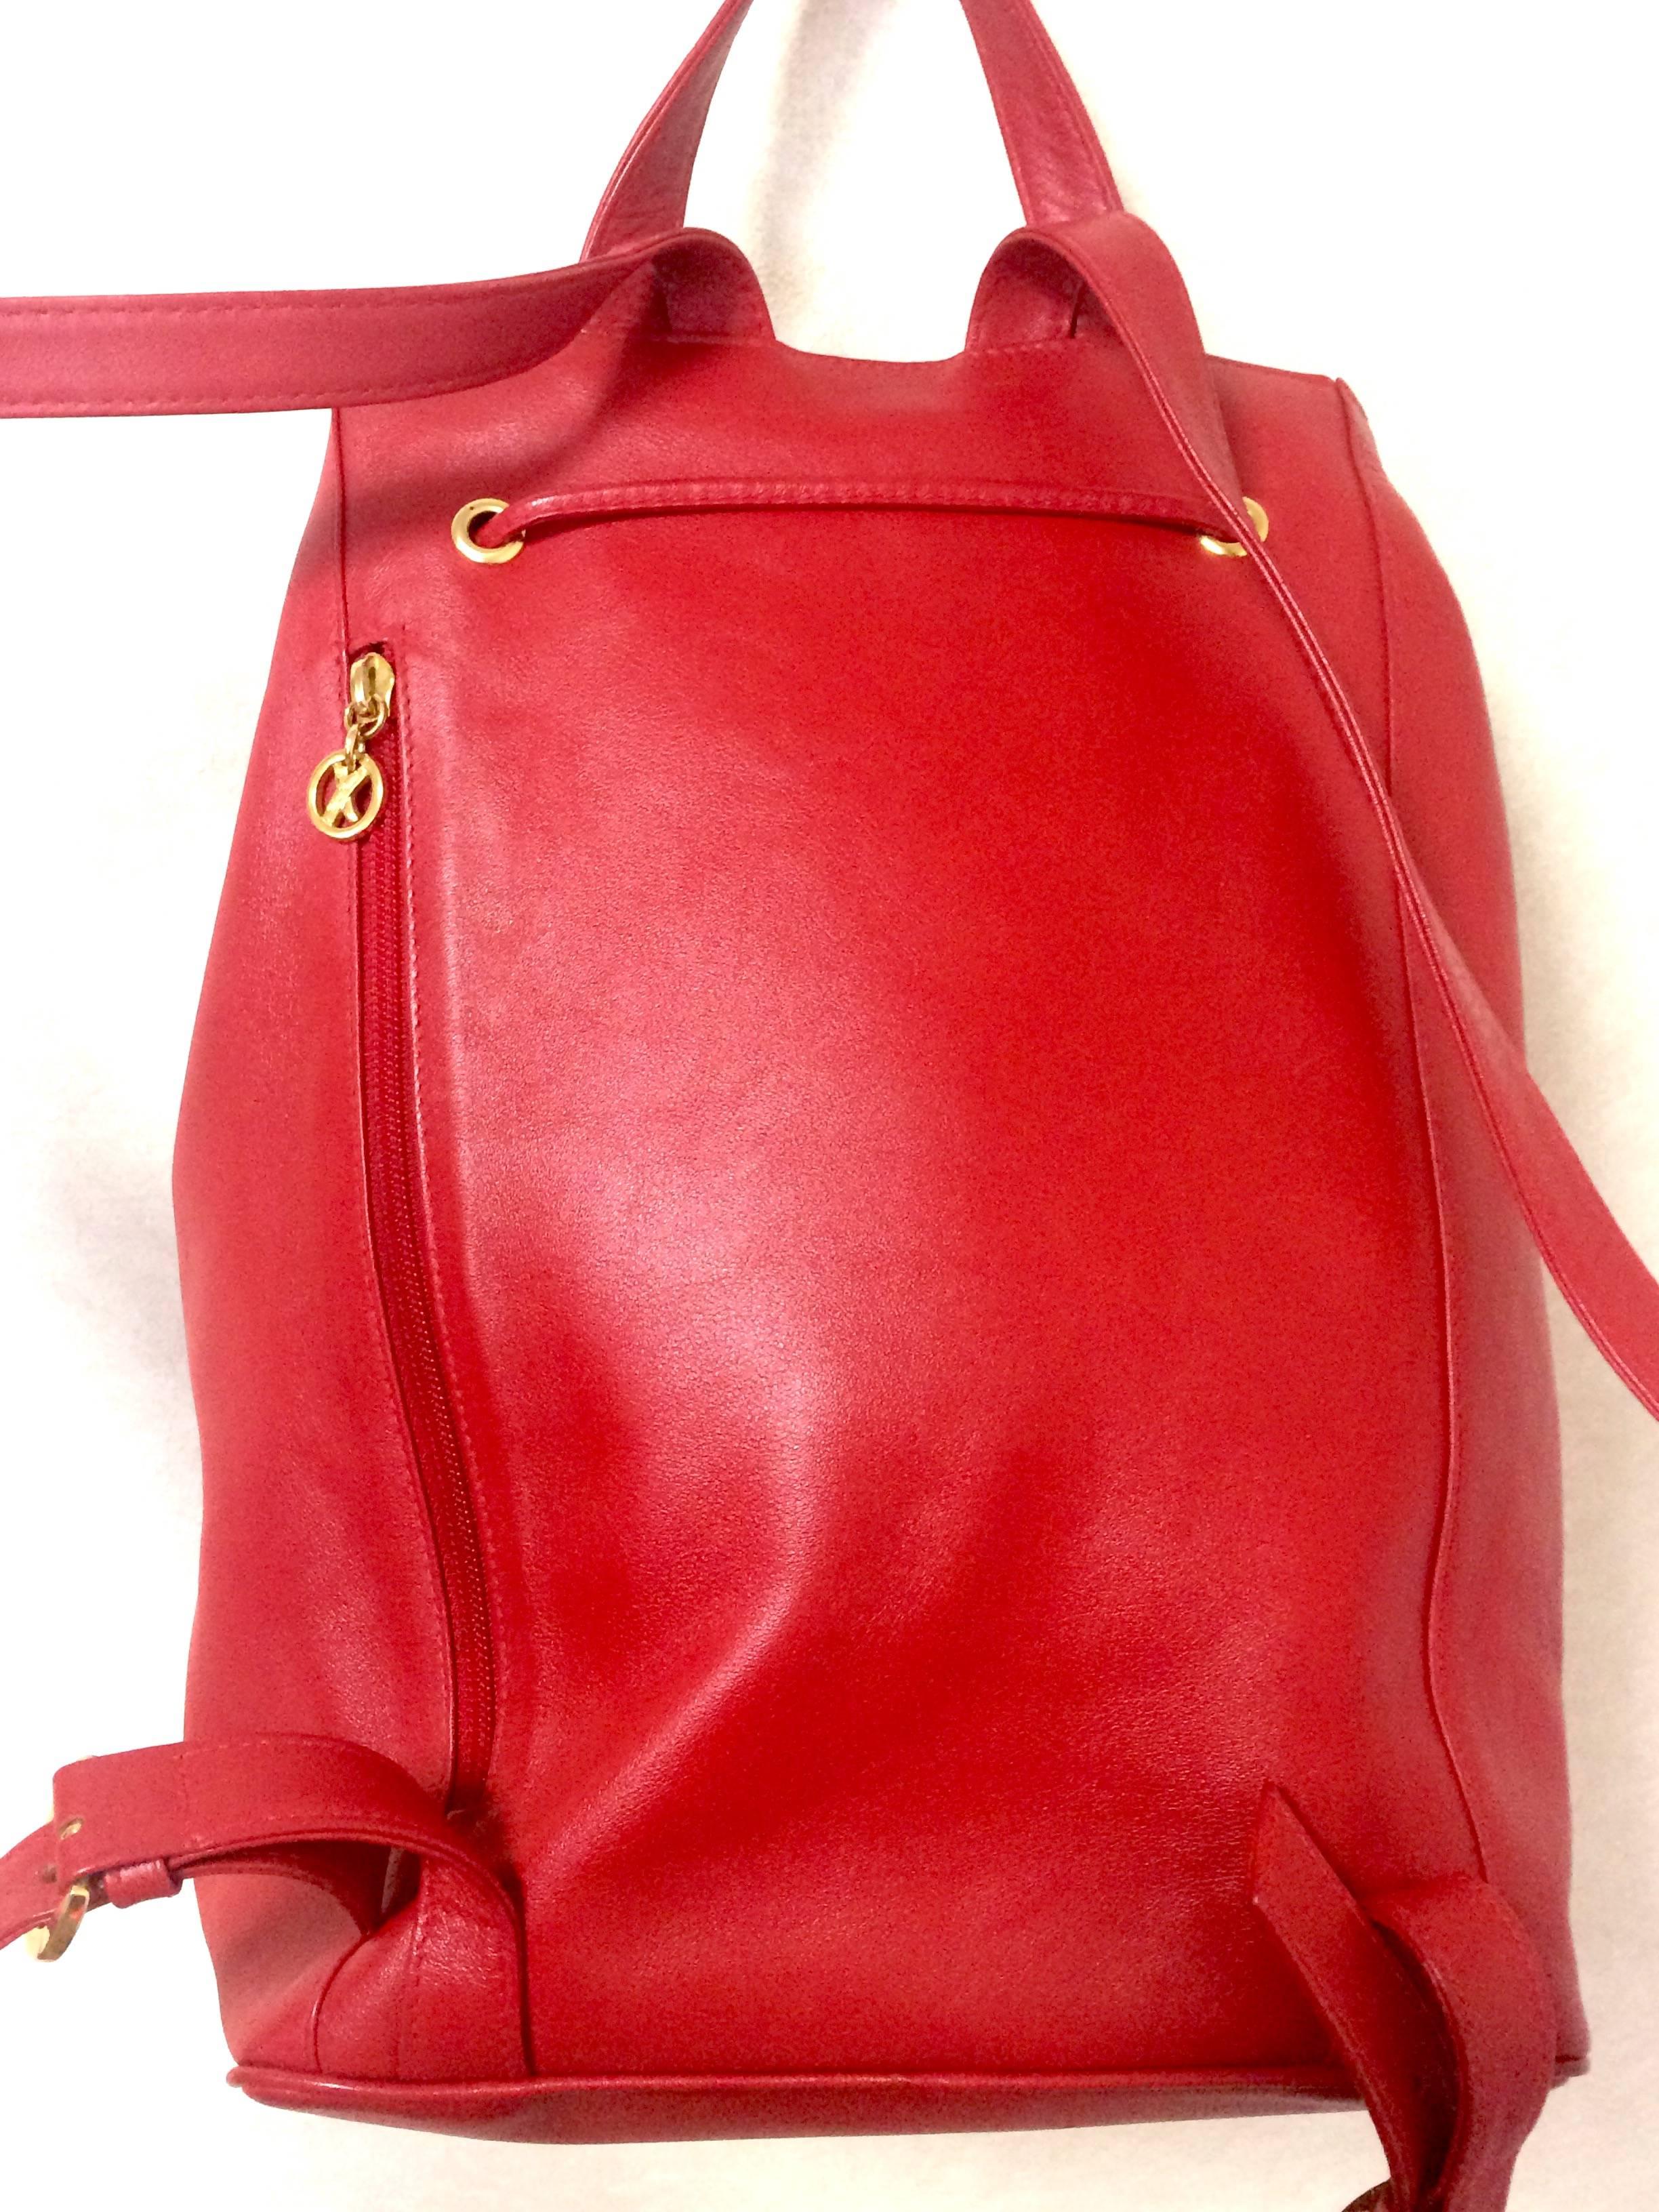 Vintage Paloma Picasso red leather backpack with golden logo motifs. Classic bag 1